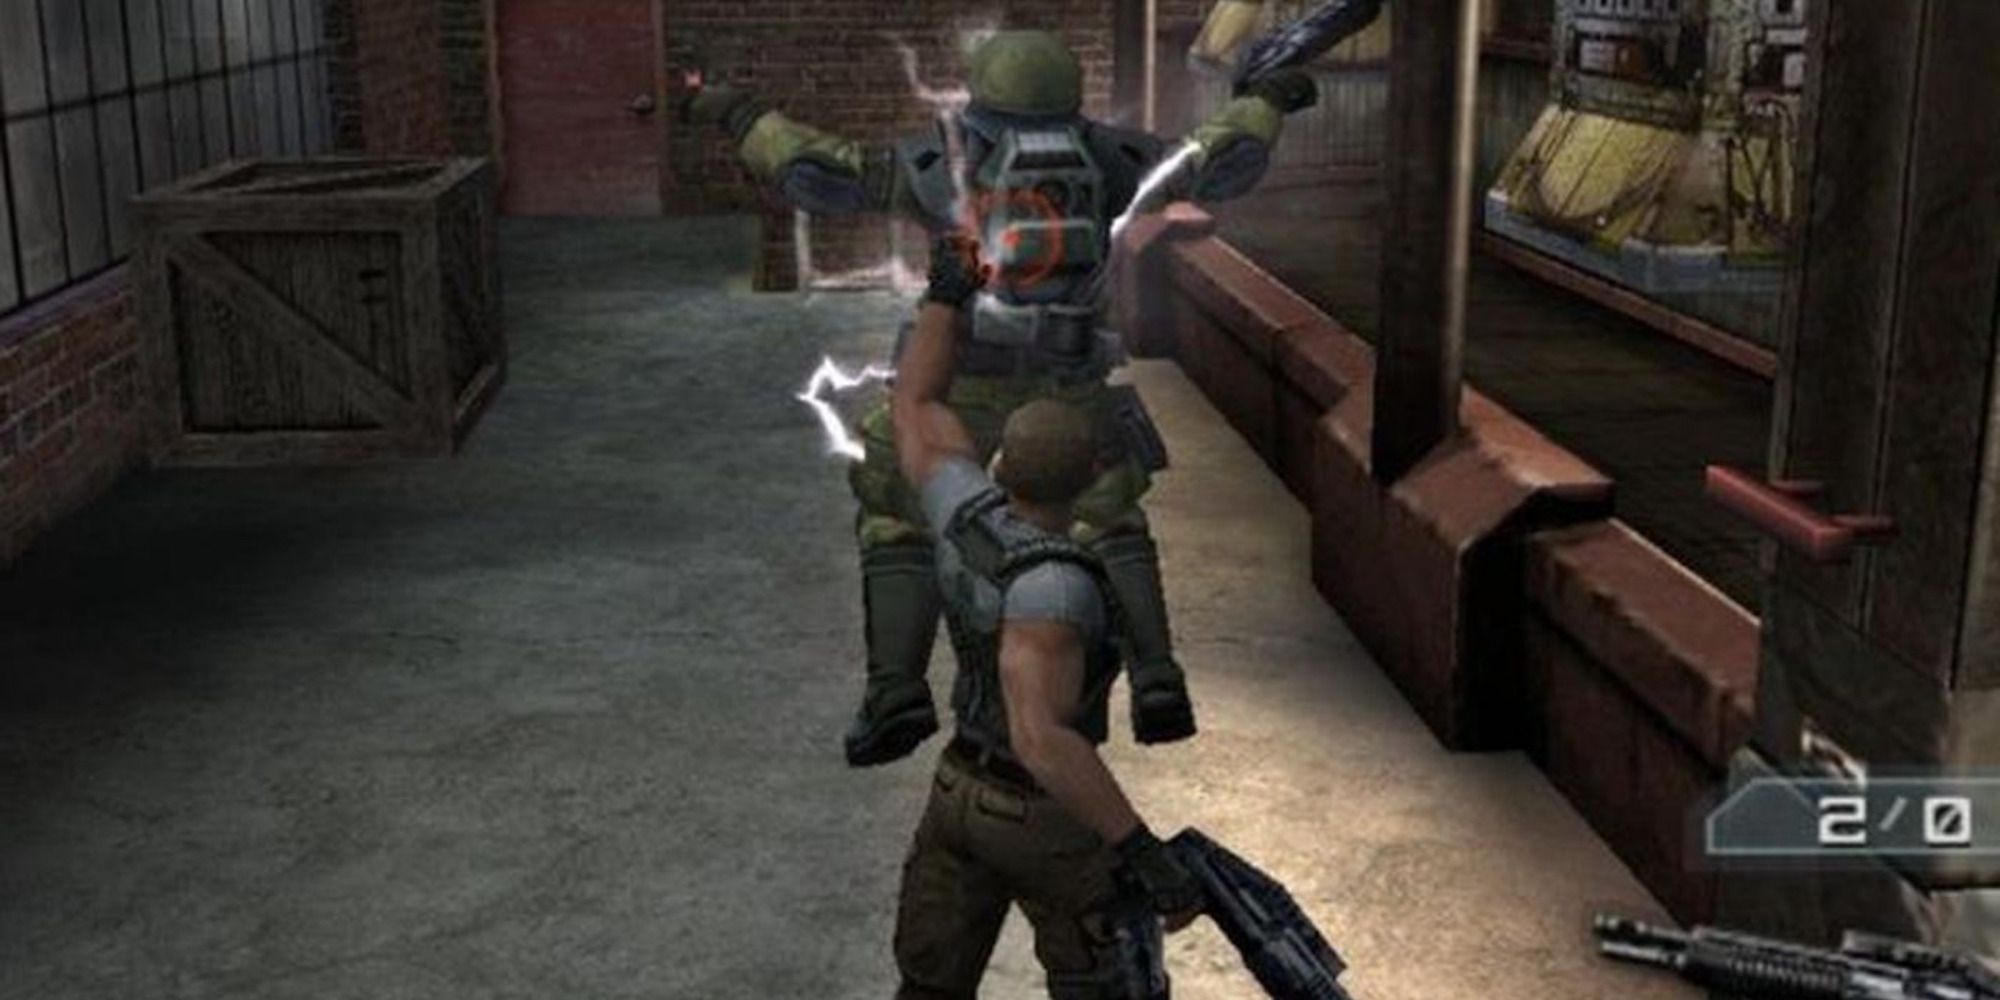 3rd person shooter games pc free download